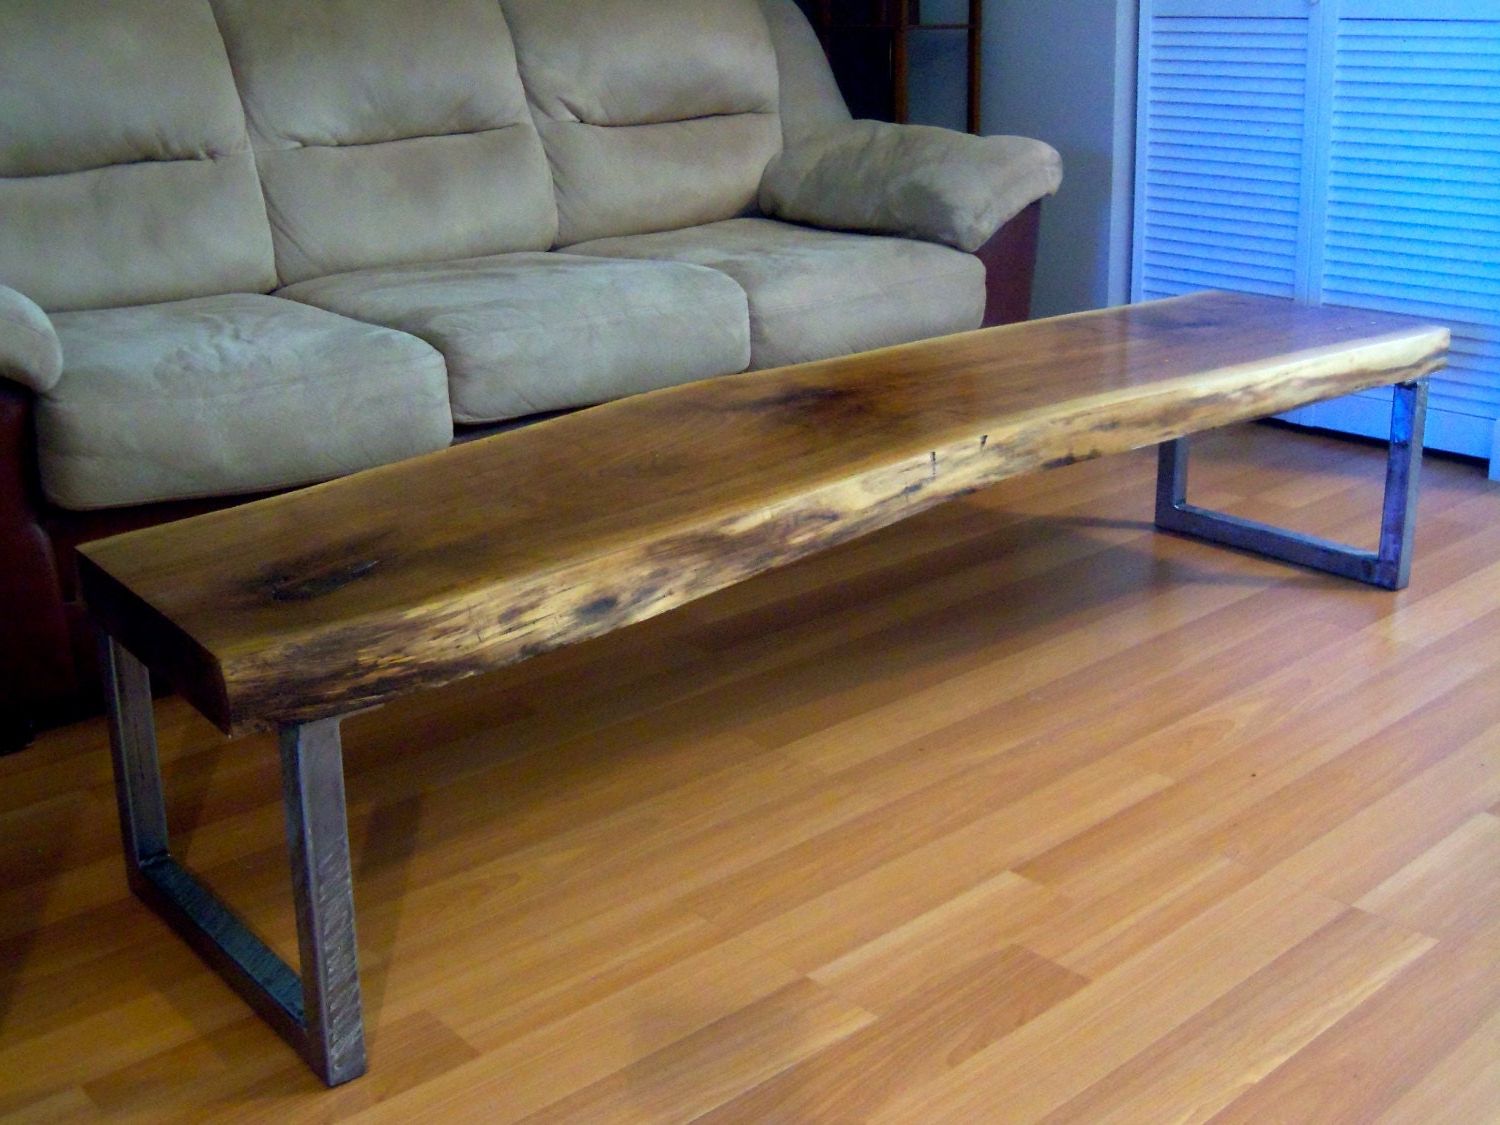 Live Edge Black Walnut Slab Coffee Table Intended For Well Known Walnut Coffee Tables (View 7 of 20)